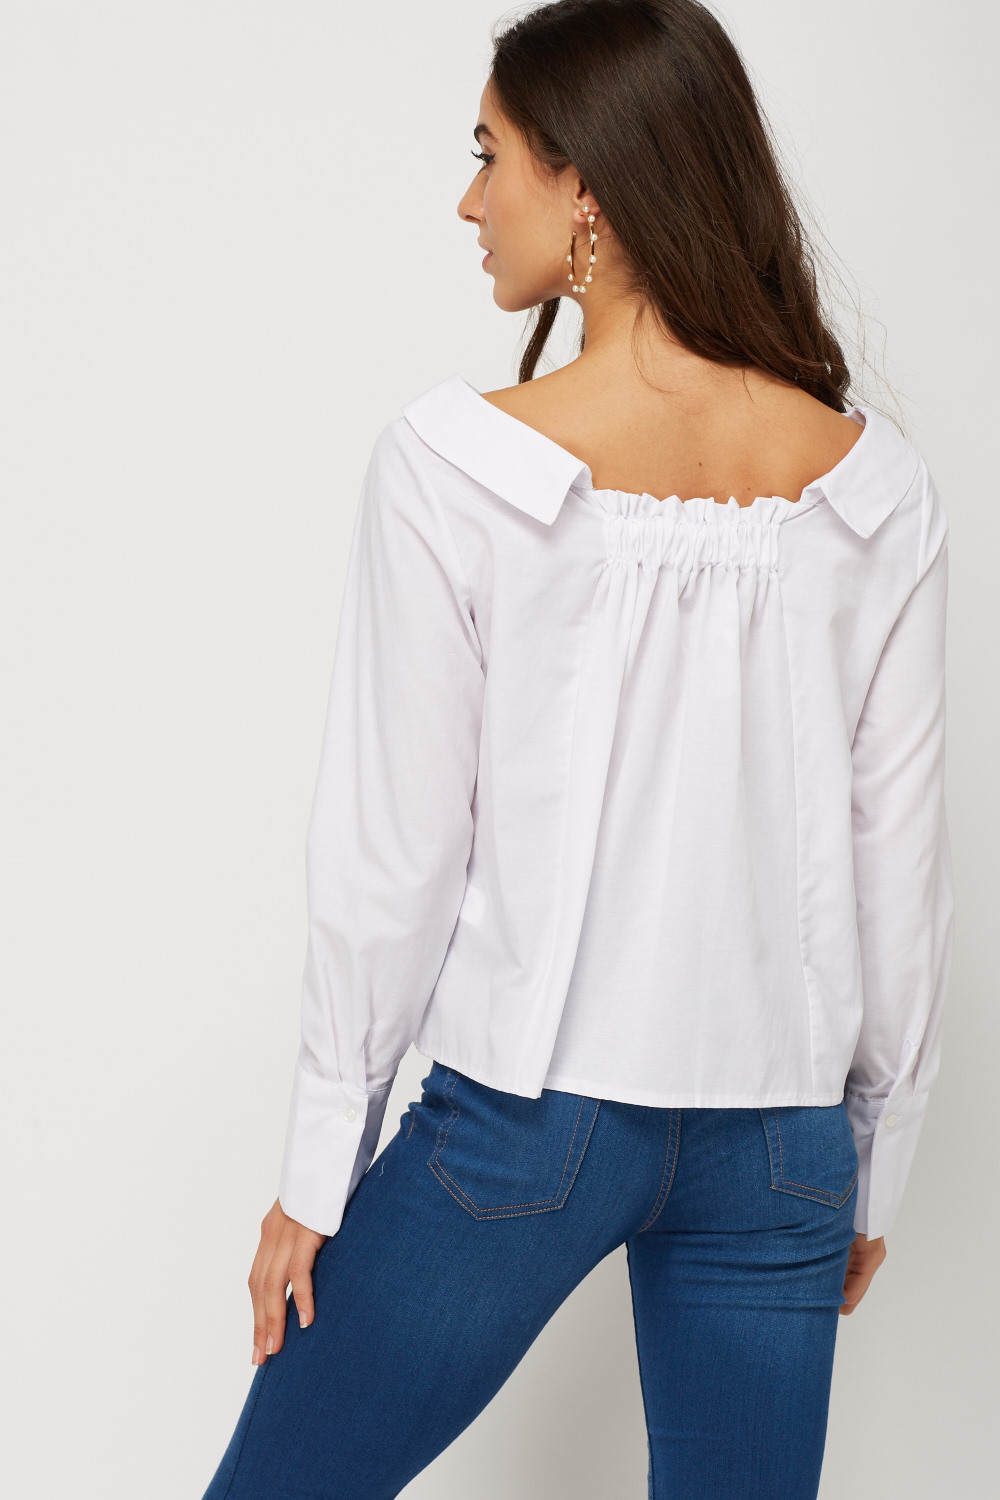 Button Up White Casual Top - Just $7